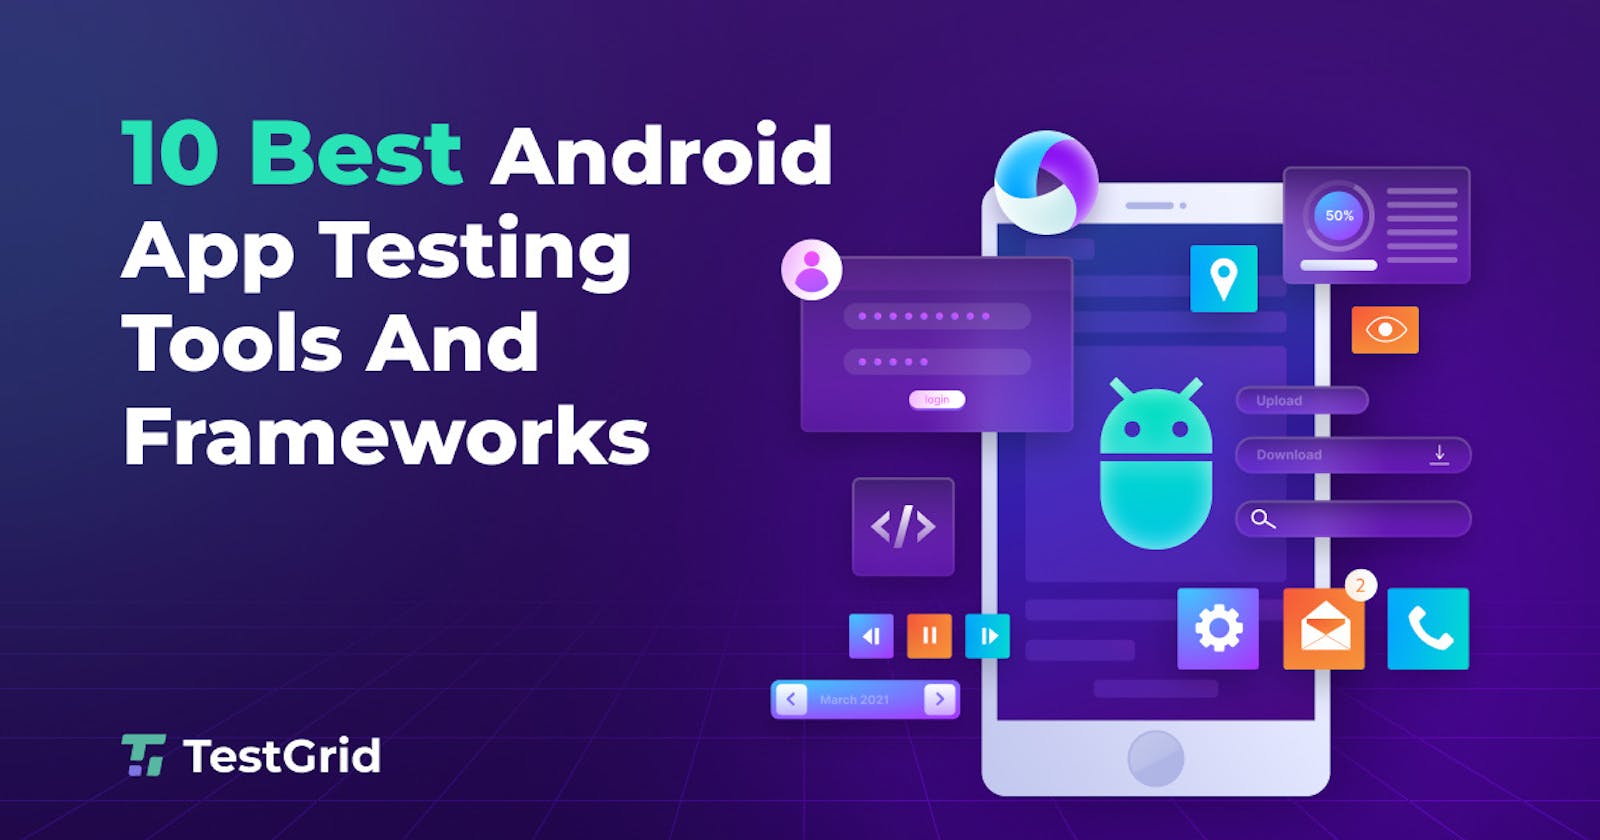 10 Best Android App Testing Tools and Frameworks